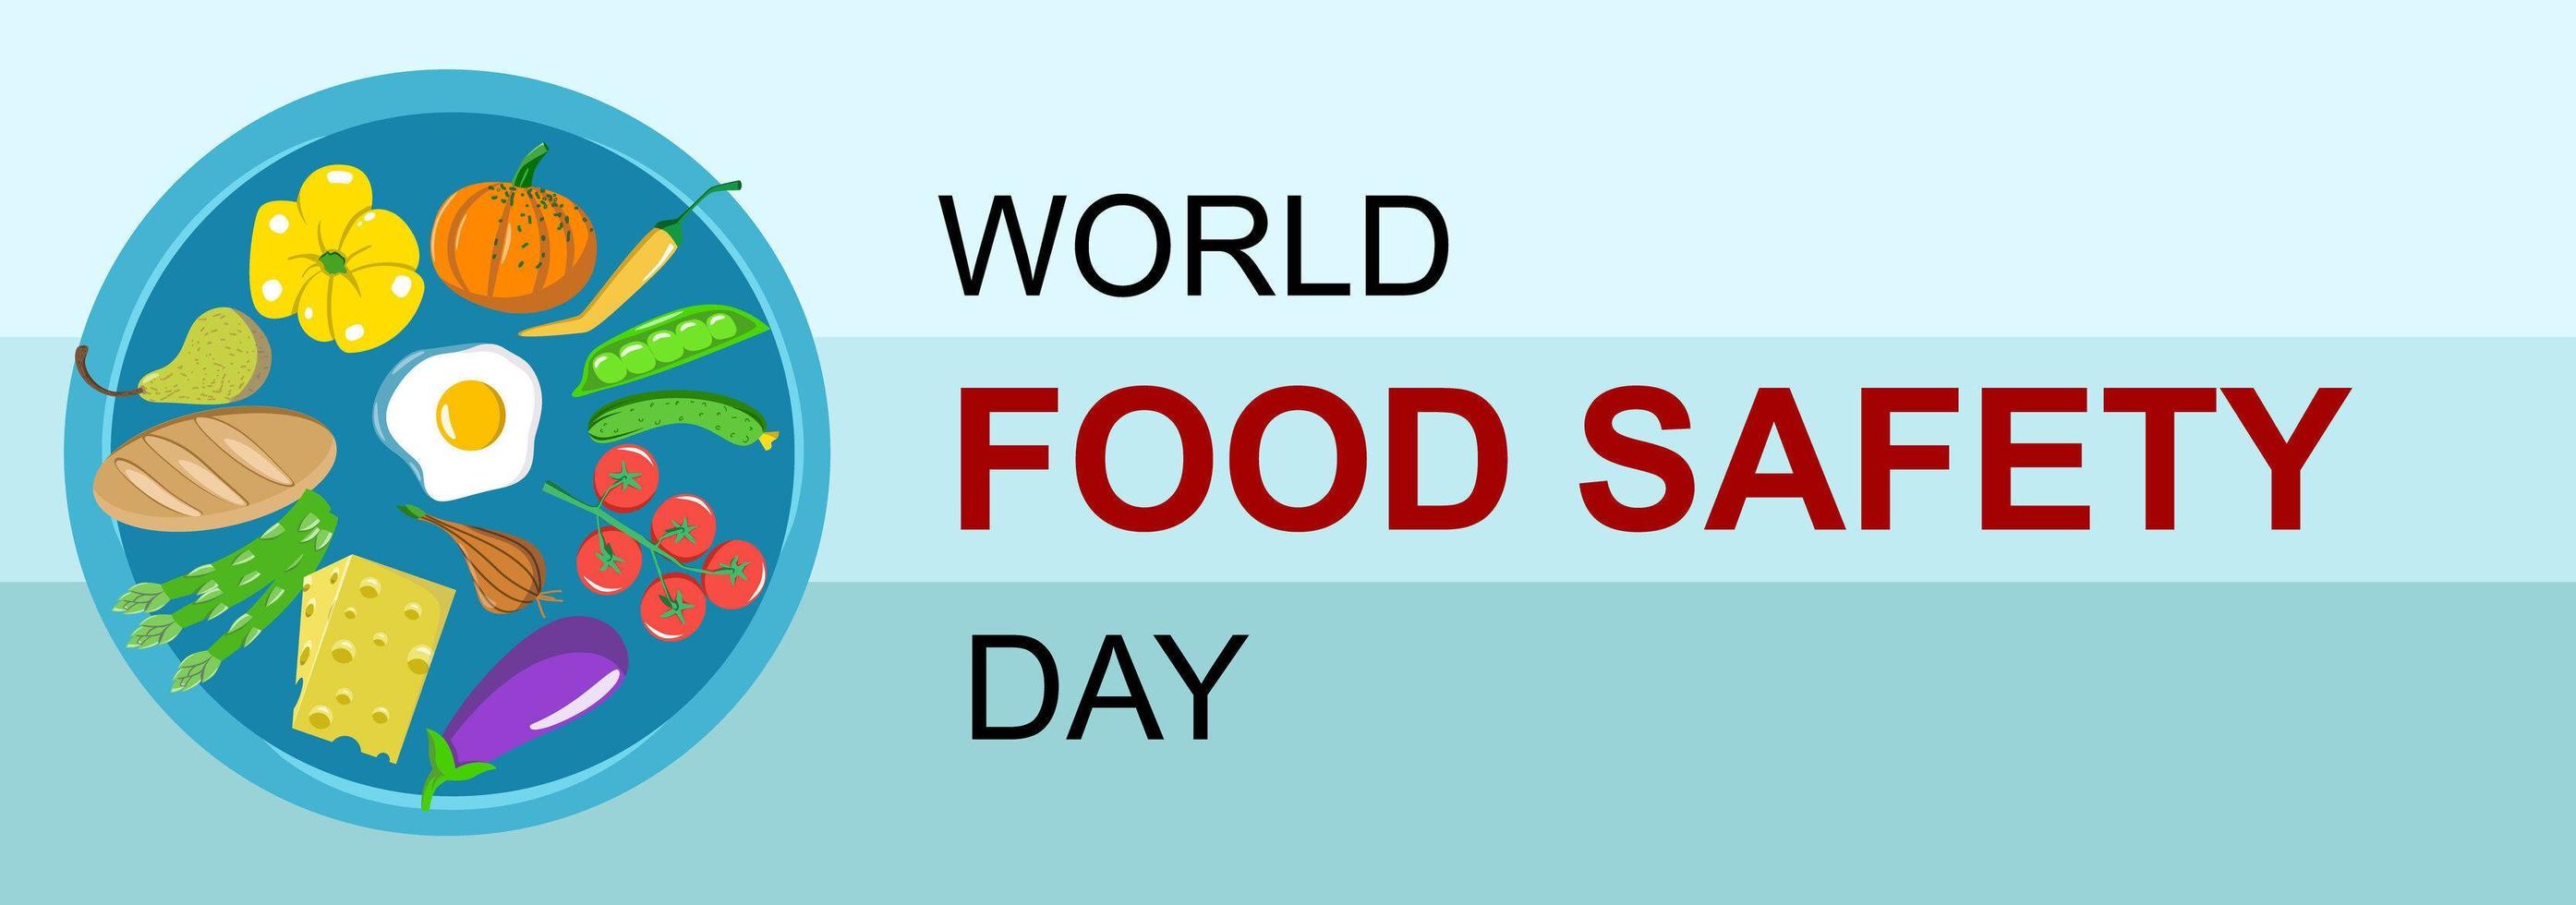 World Food Safety Day in June with vegetables, bread and fruit. vector